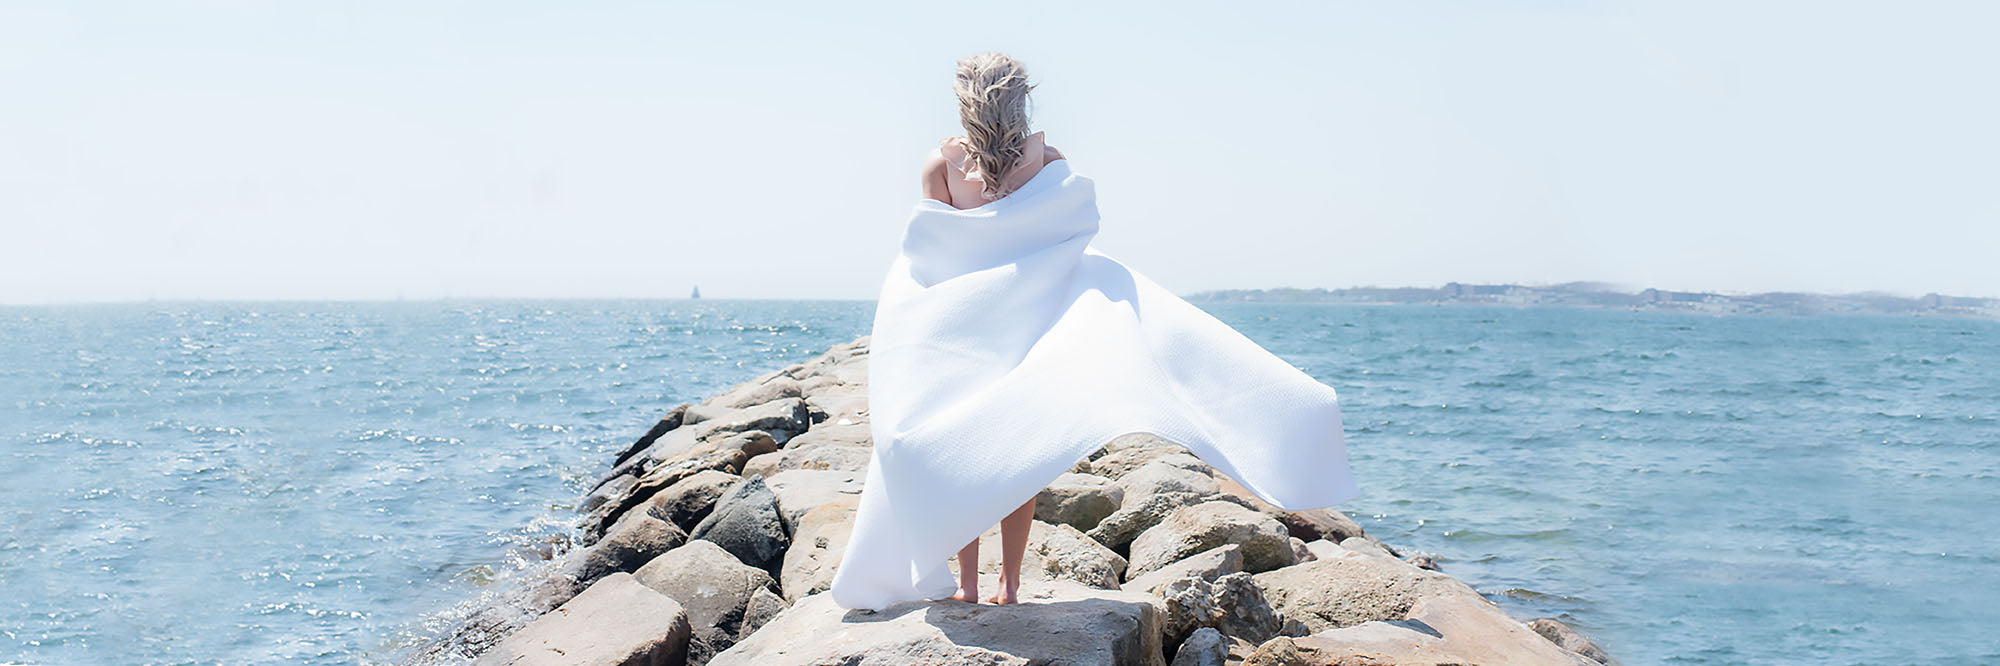 Model draping a 100% Cotton Cable Weave Blanket Over her along a beach coast, American Blanket Company